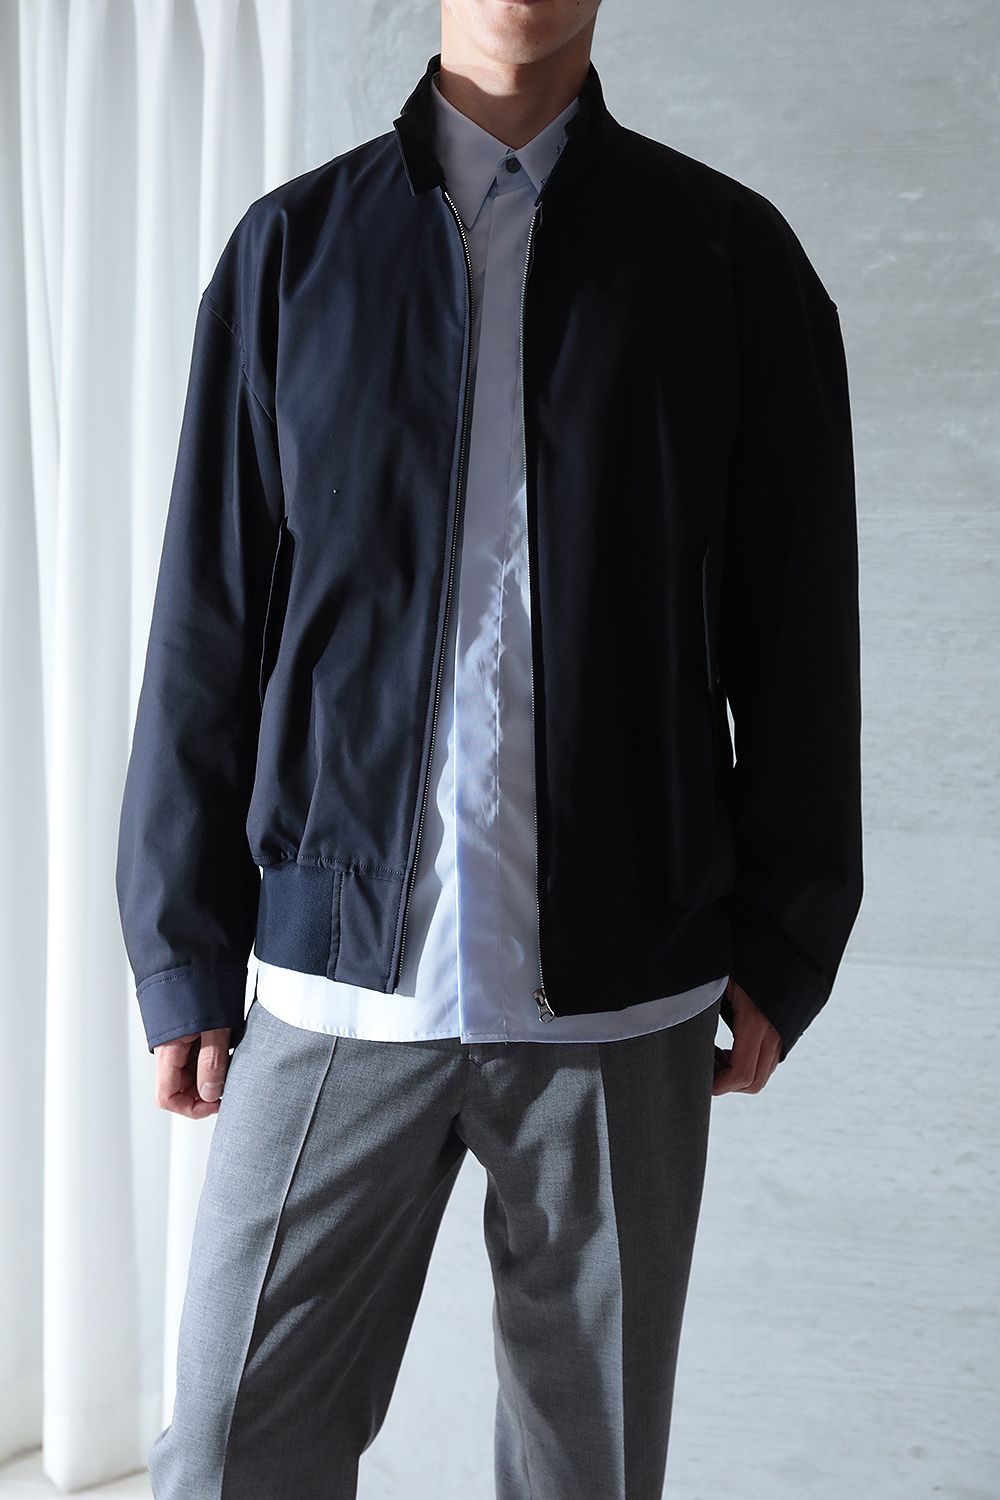 WEWILL / ウィーウィル】23SS COLLECTION - 2nd Delivery